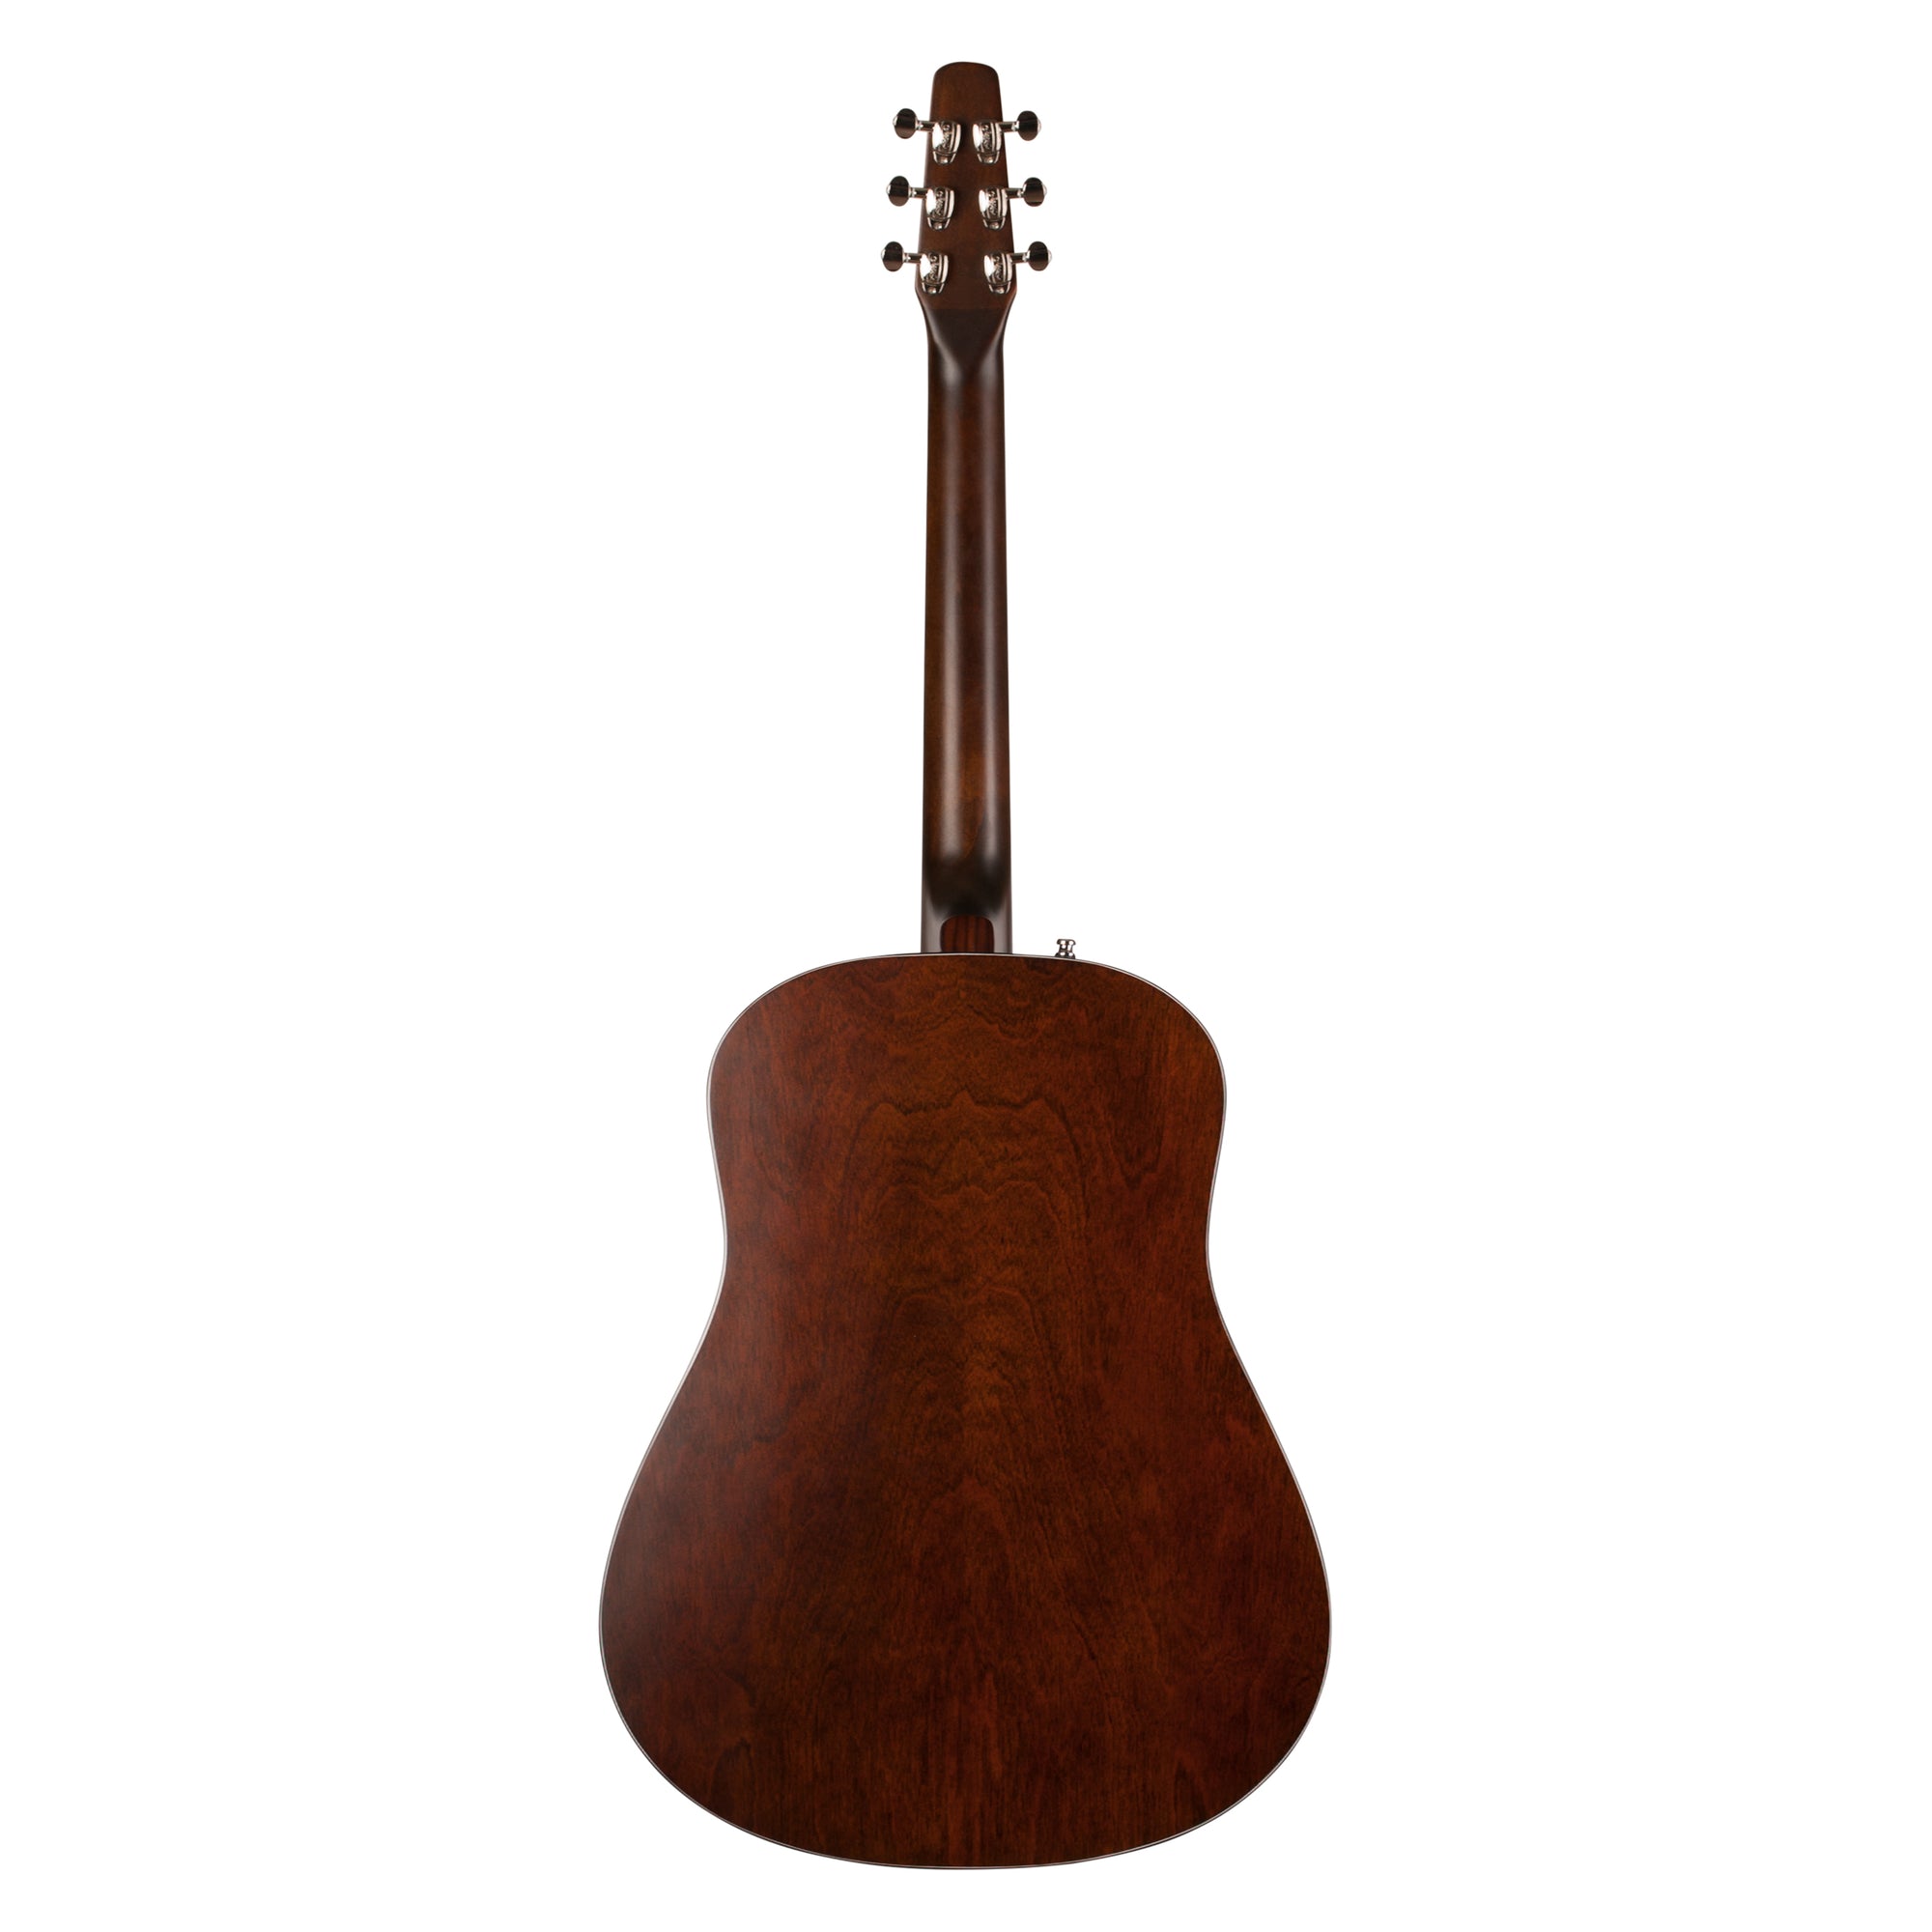 MUXIKA C20 42-inch high-quality acoustic guitar with solid spruce top,  maple sides and back, free shipping